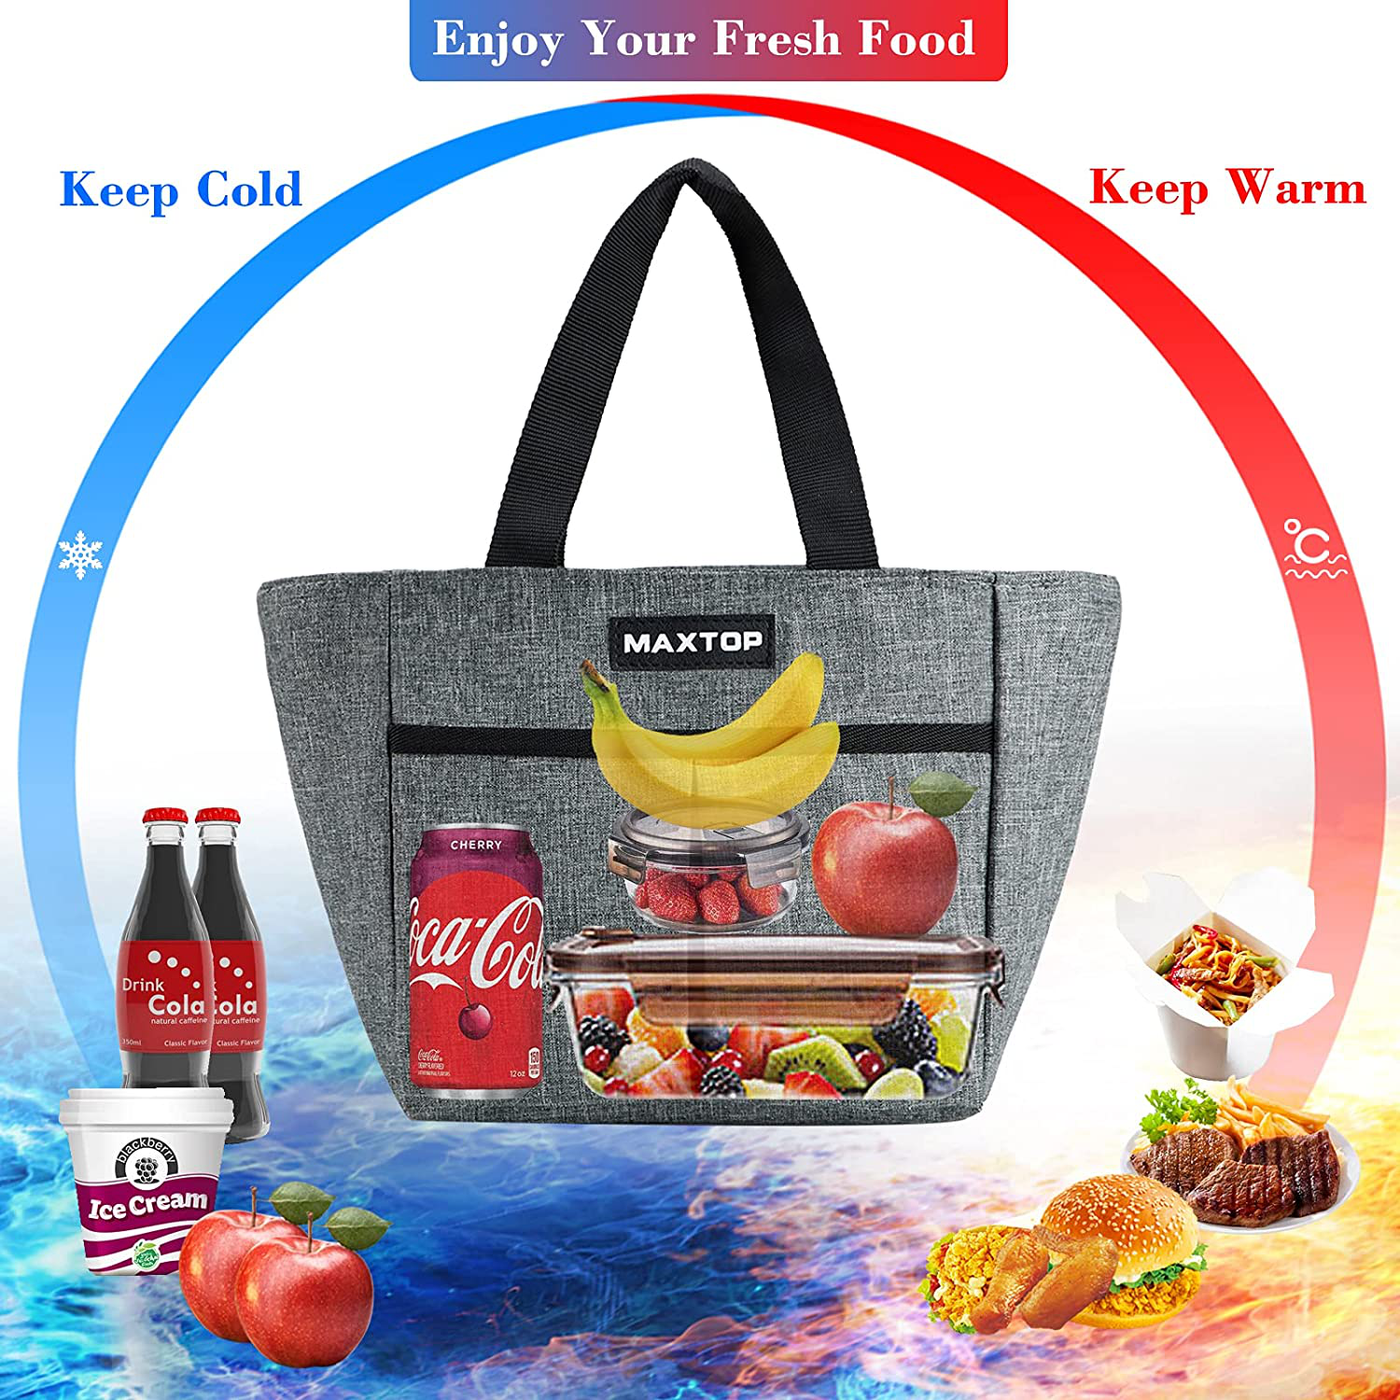 MAXTOP Small Lunch Bags for Women,Insulated Thermal Lunch Tote Bag,Lunch Box with Front Pocket for Office Work Picnic Shopping